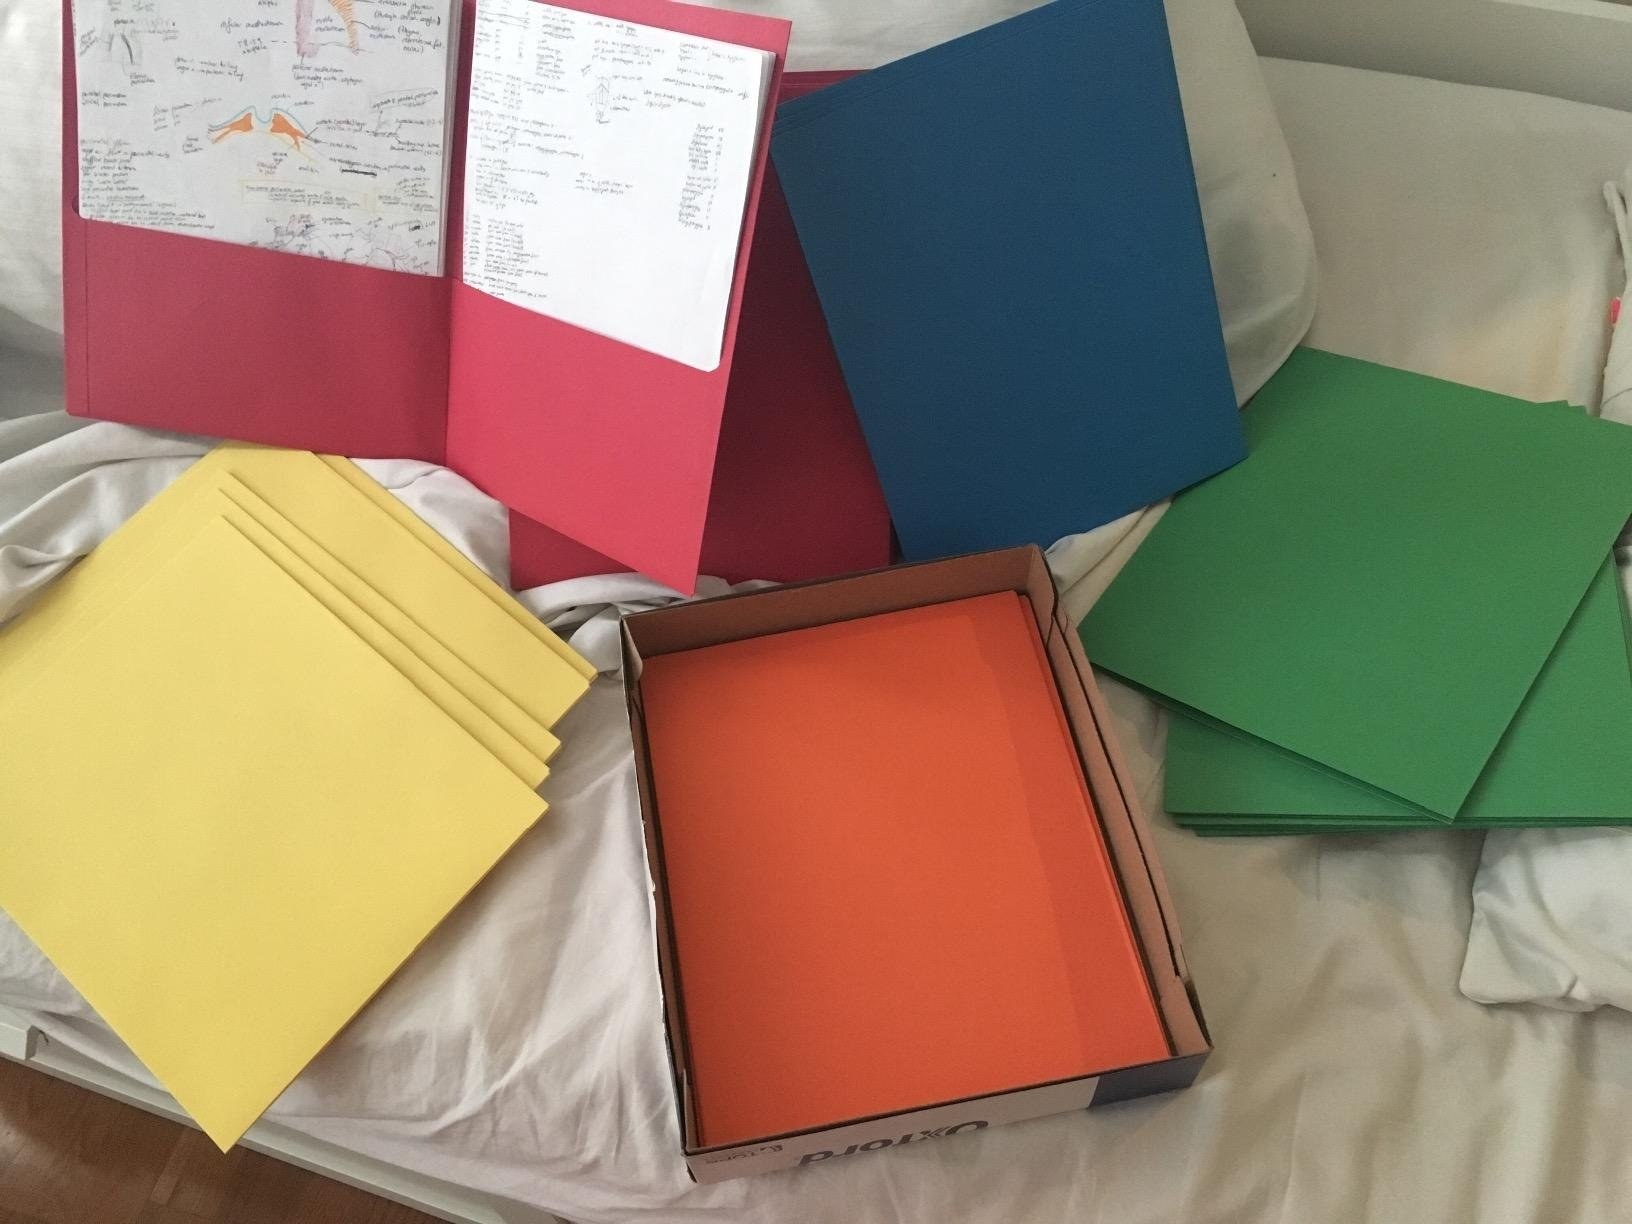 Reviewer's photo showing the folders in yellow, orange, red, blue and green